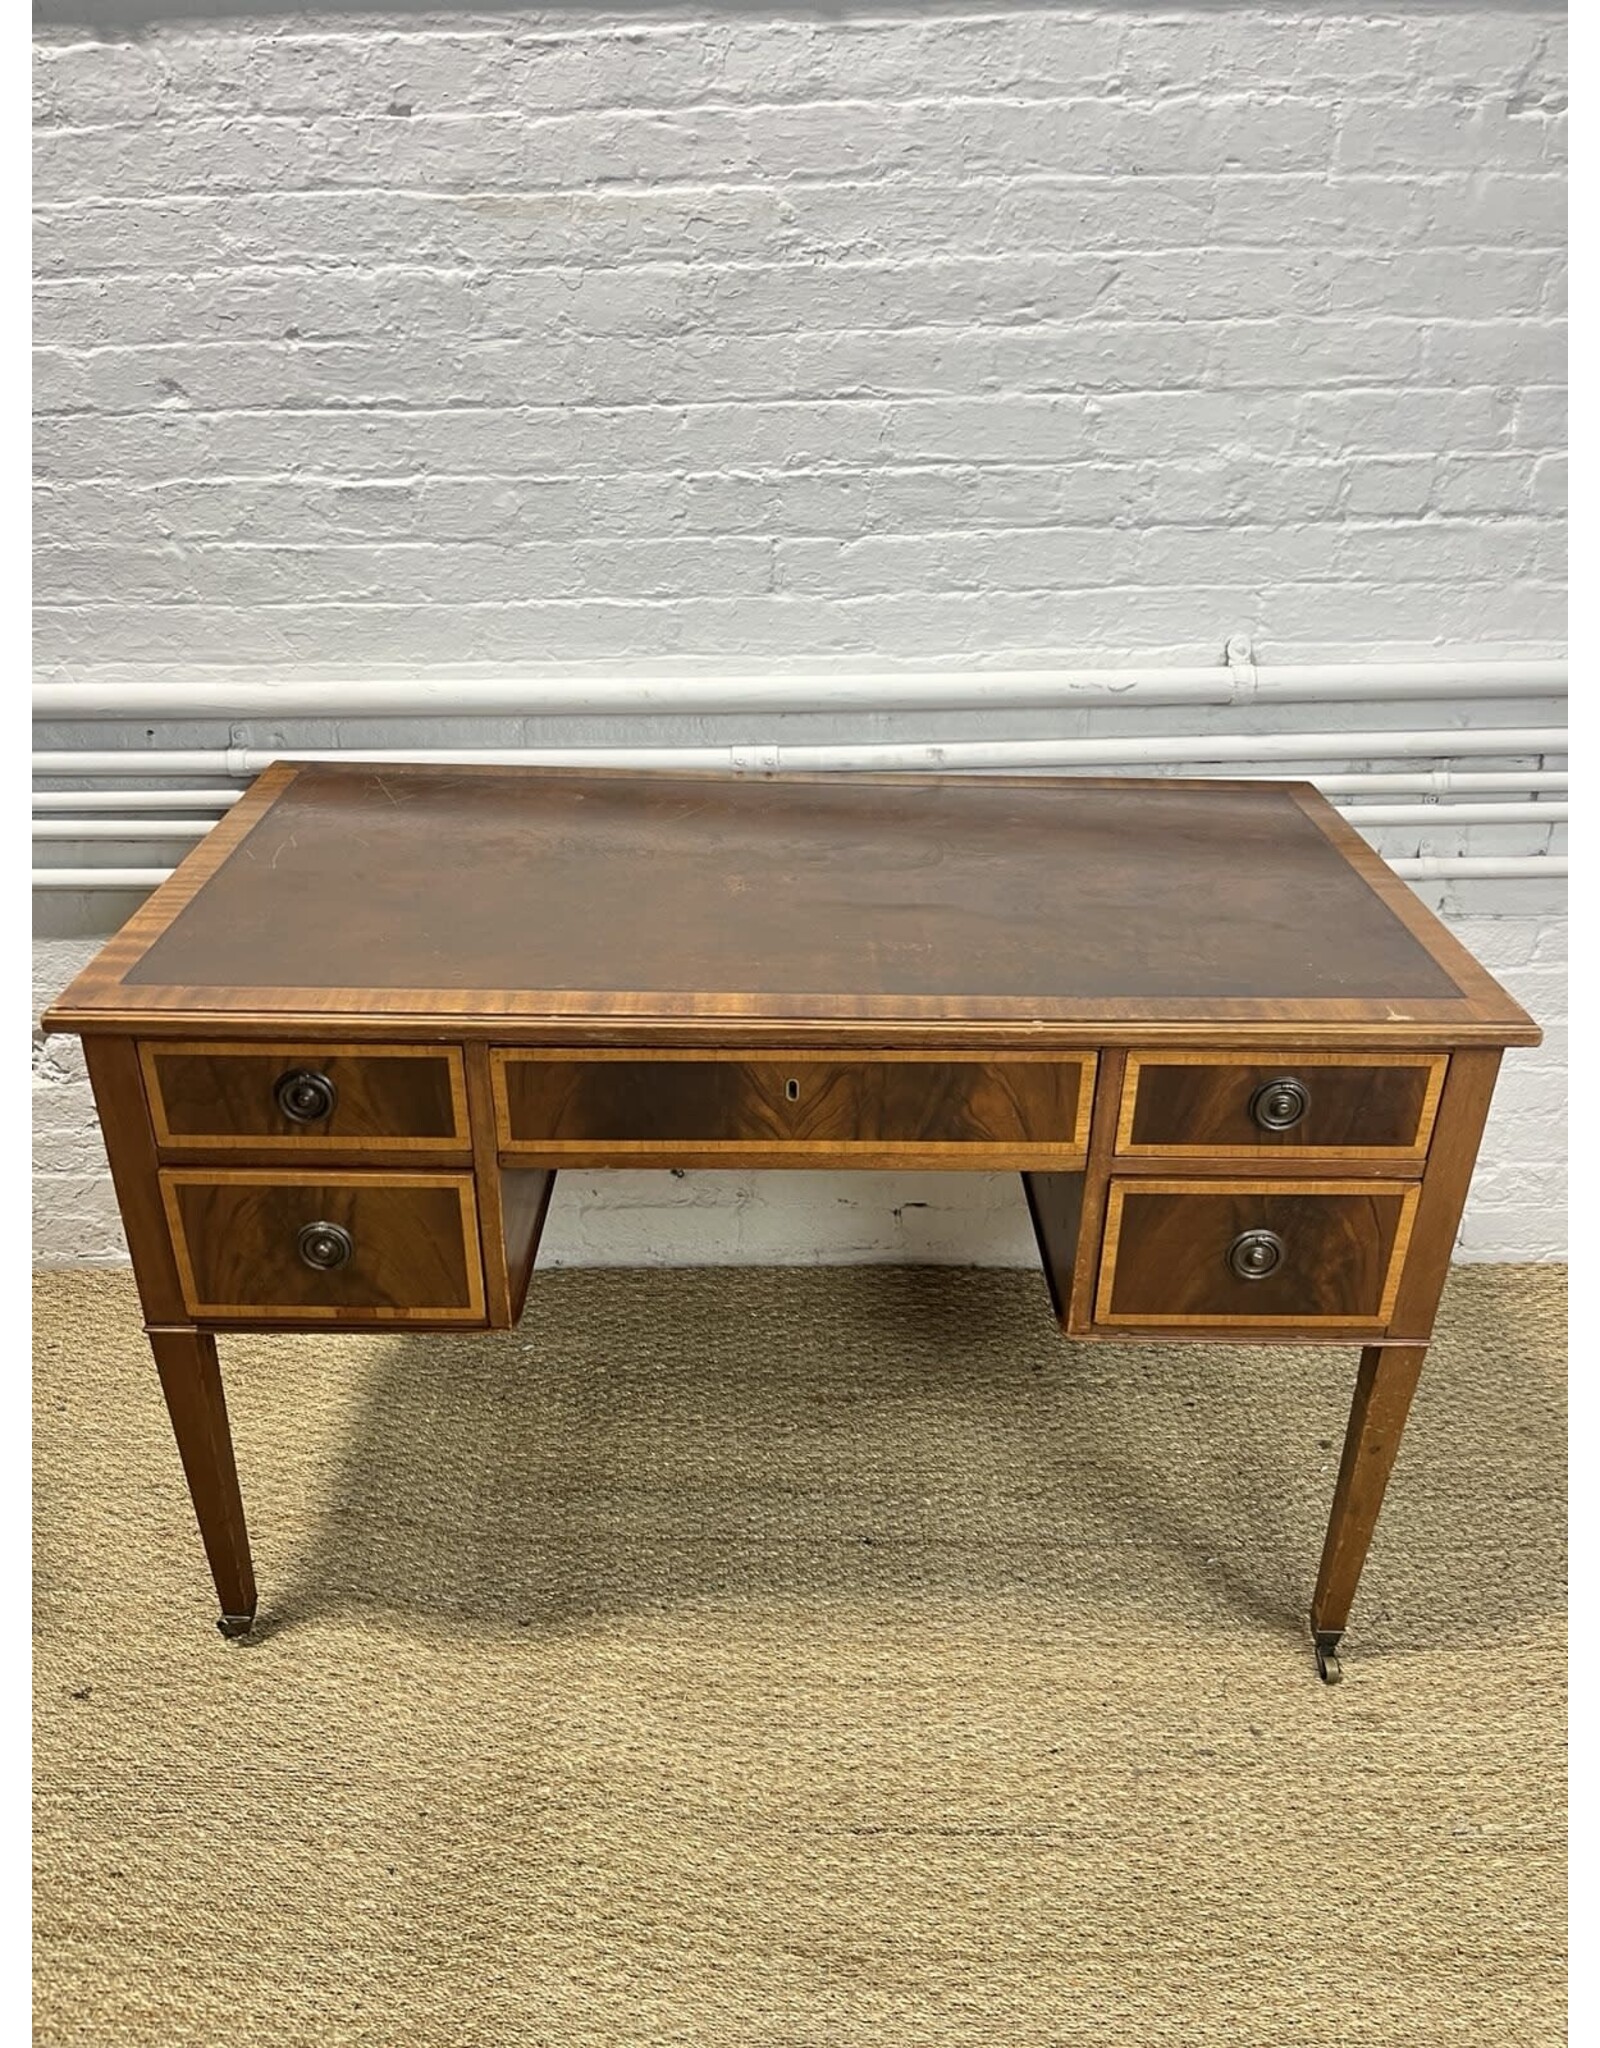 Vintage French Directoire Style Desk